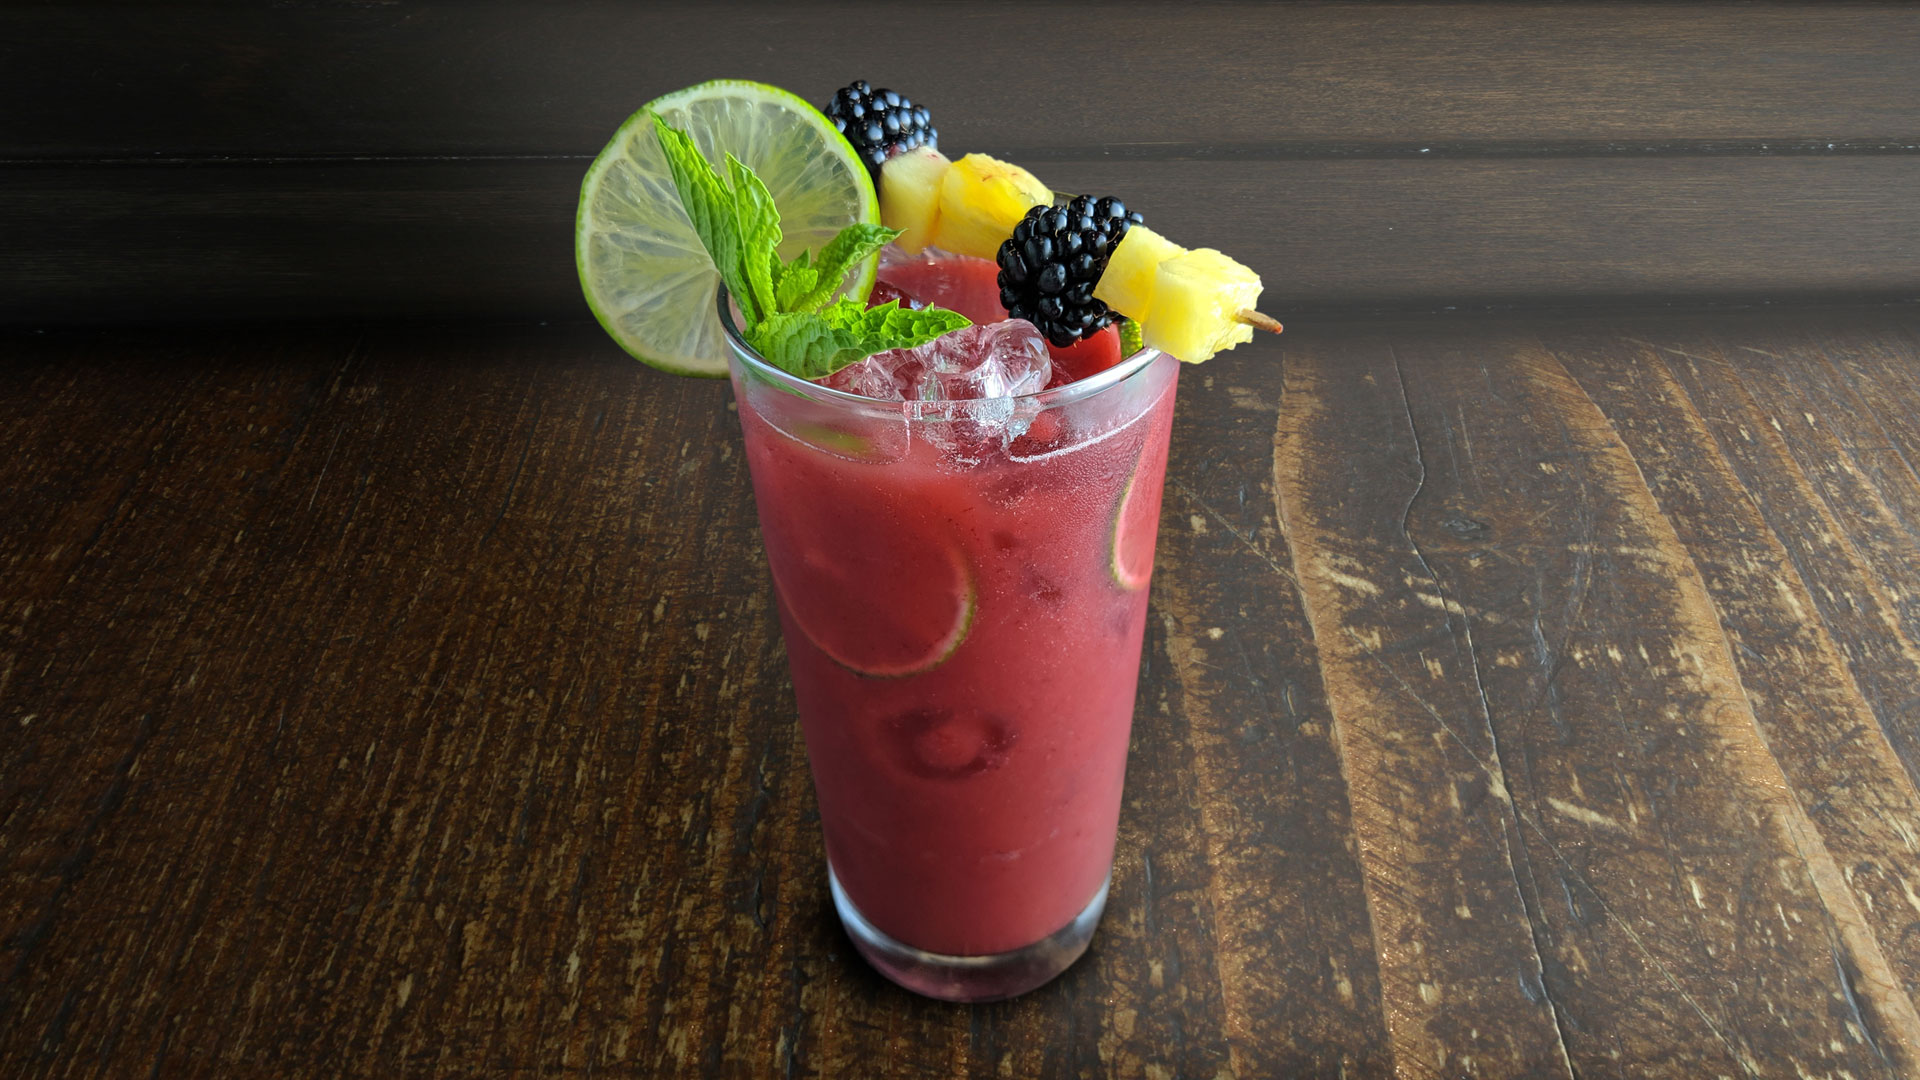 Featuring Haliburton’s ready-to-use roasted pineapple and blackberry mixer and pickled pineapple garish.